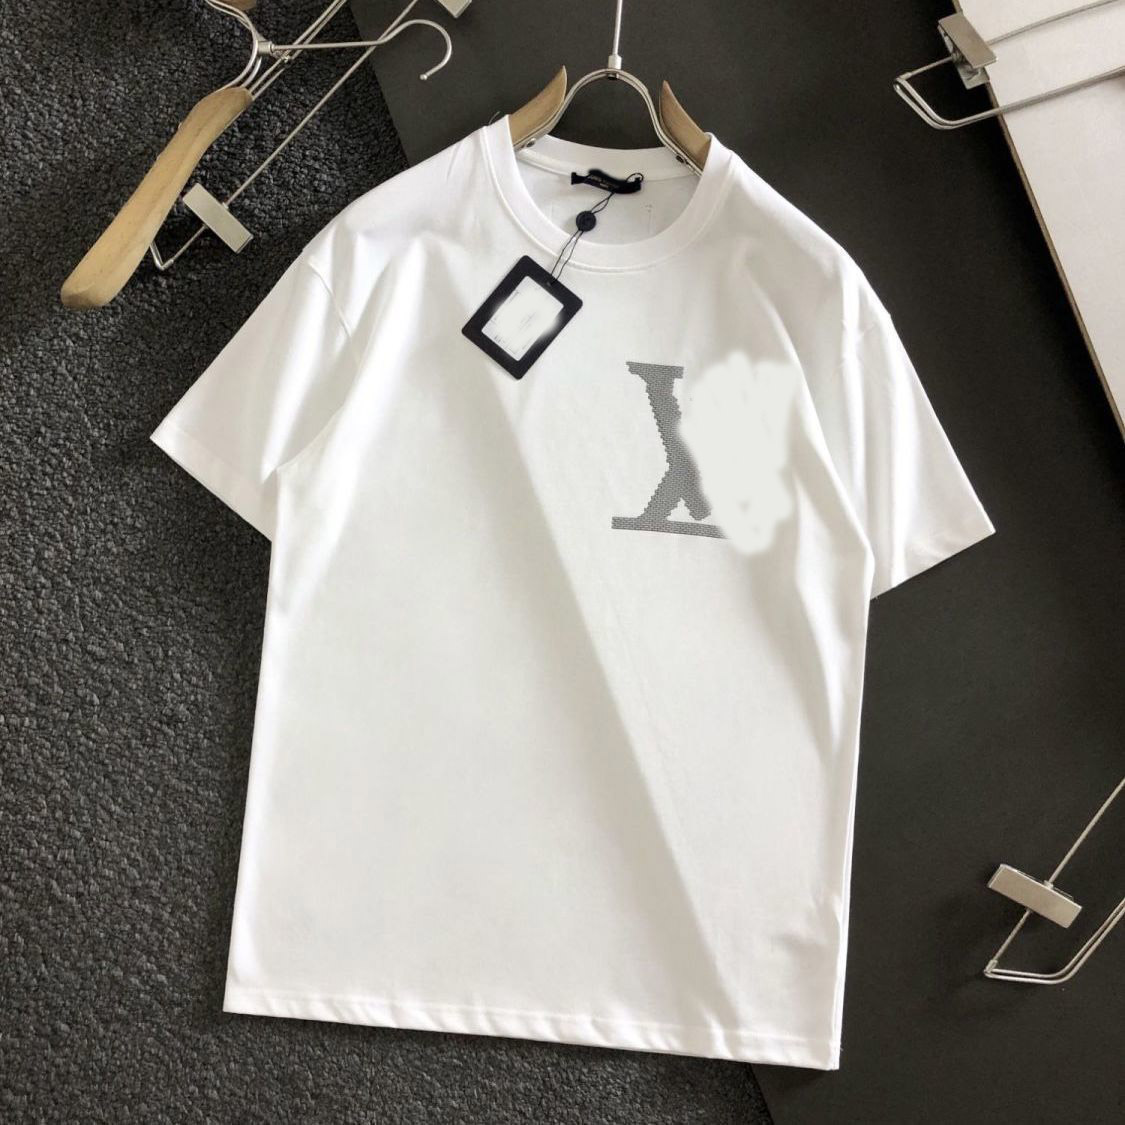 Summer Men Women Designers T Shirts Loose Oversize Tees Apparel Fashion Tops Mans Casual Chest Letter Shirt Luxury Street Shorts Sleeve Clothes Mens Tshirts M-3XL#007